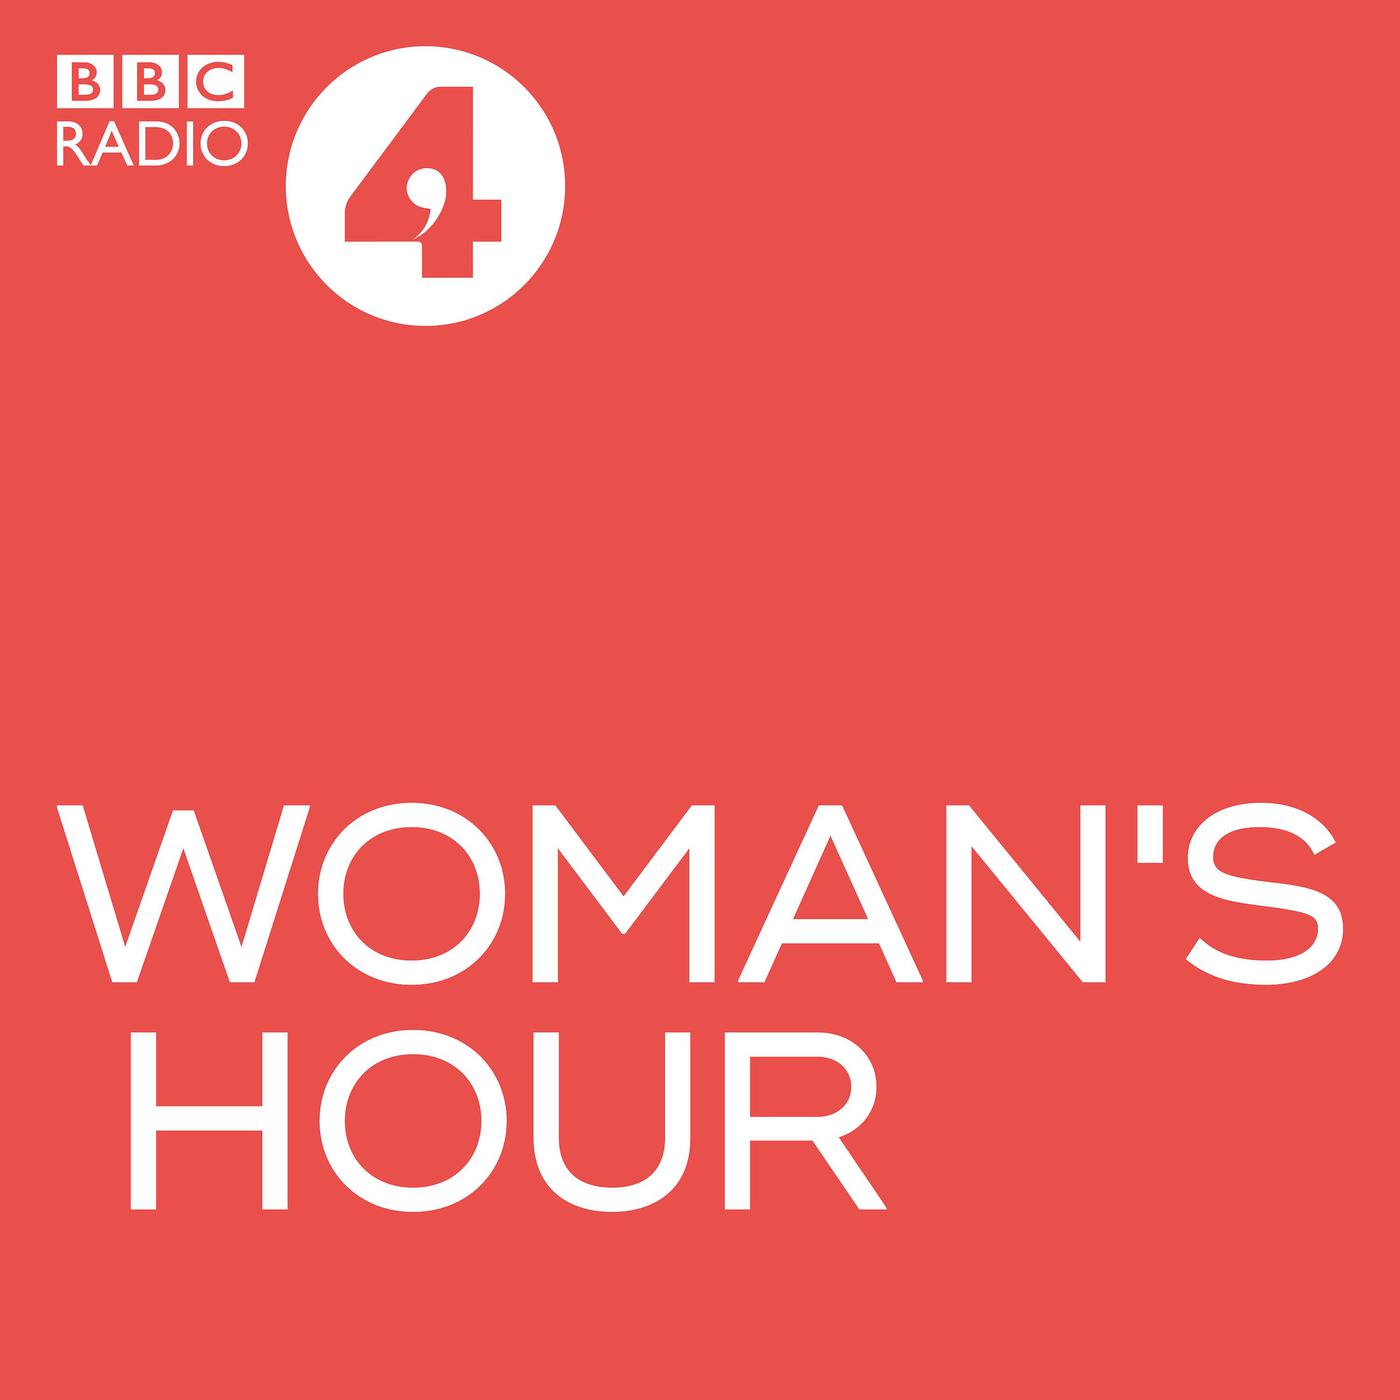 Red square with white writing BBC Radio 4 Woman's Hour